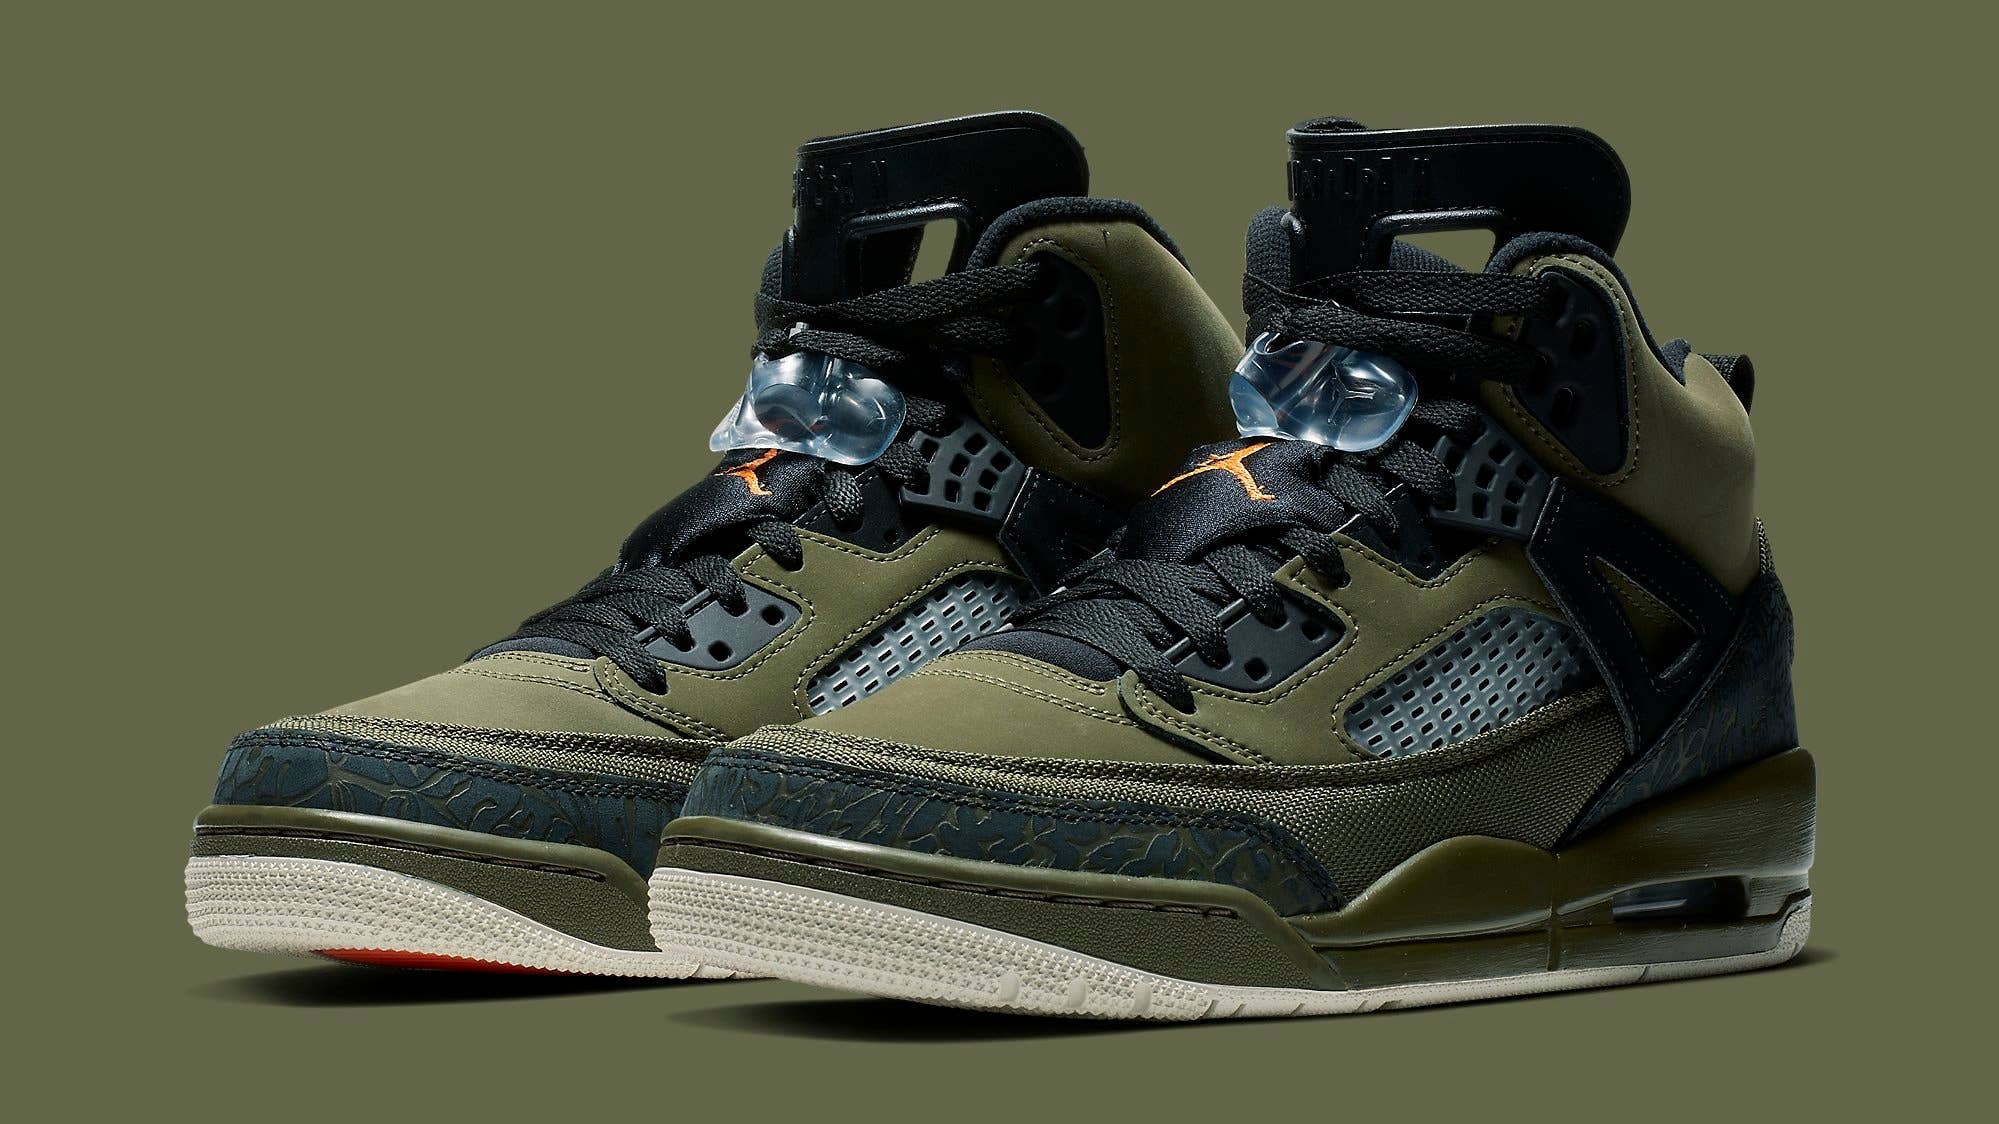 Jordan Spizike Undefeated Olive Green Release Date 315371 300 Pair